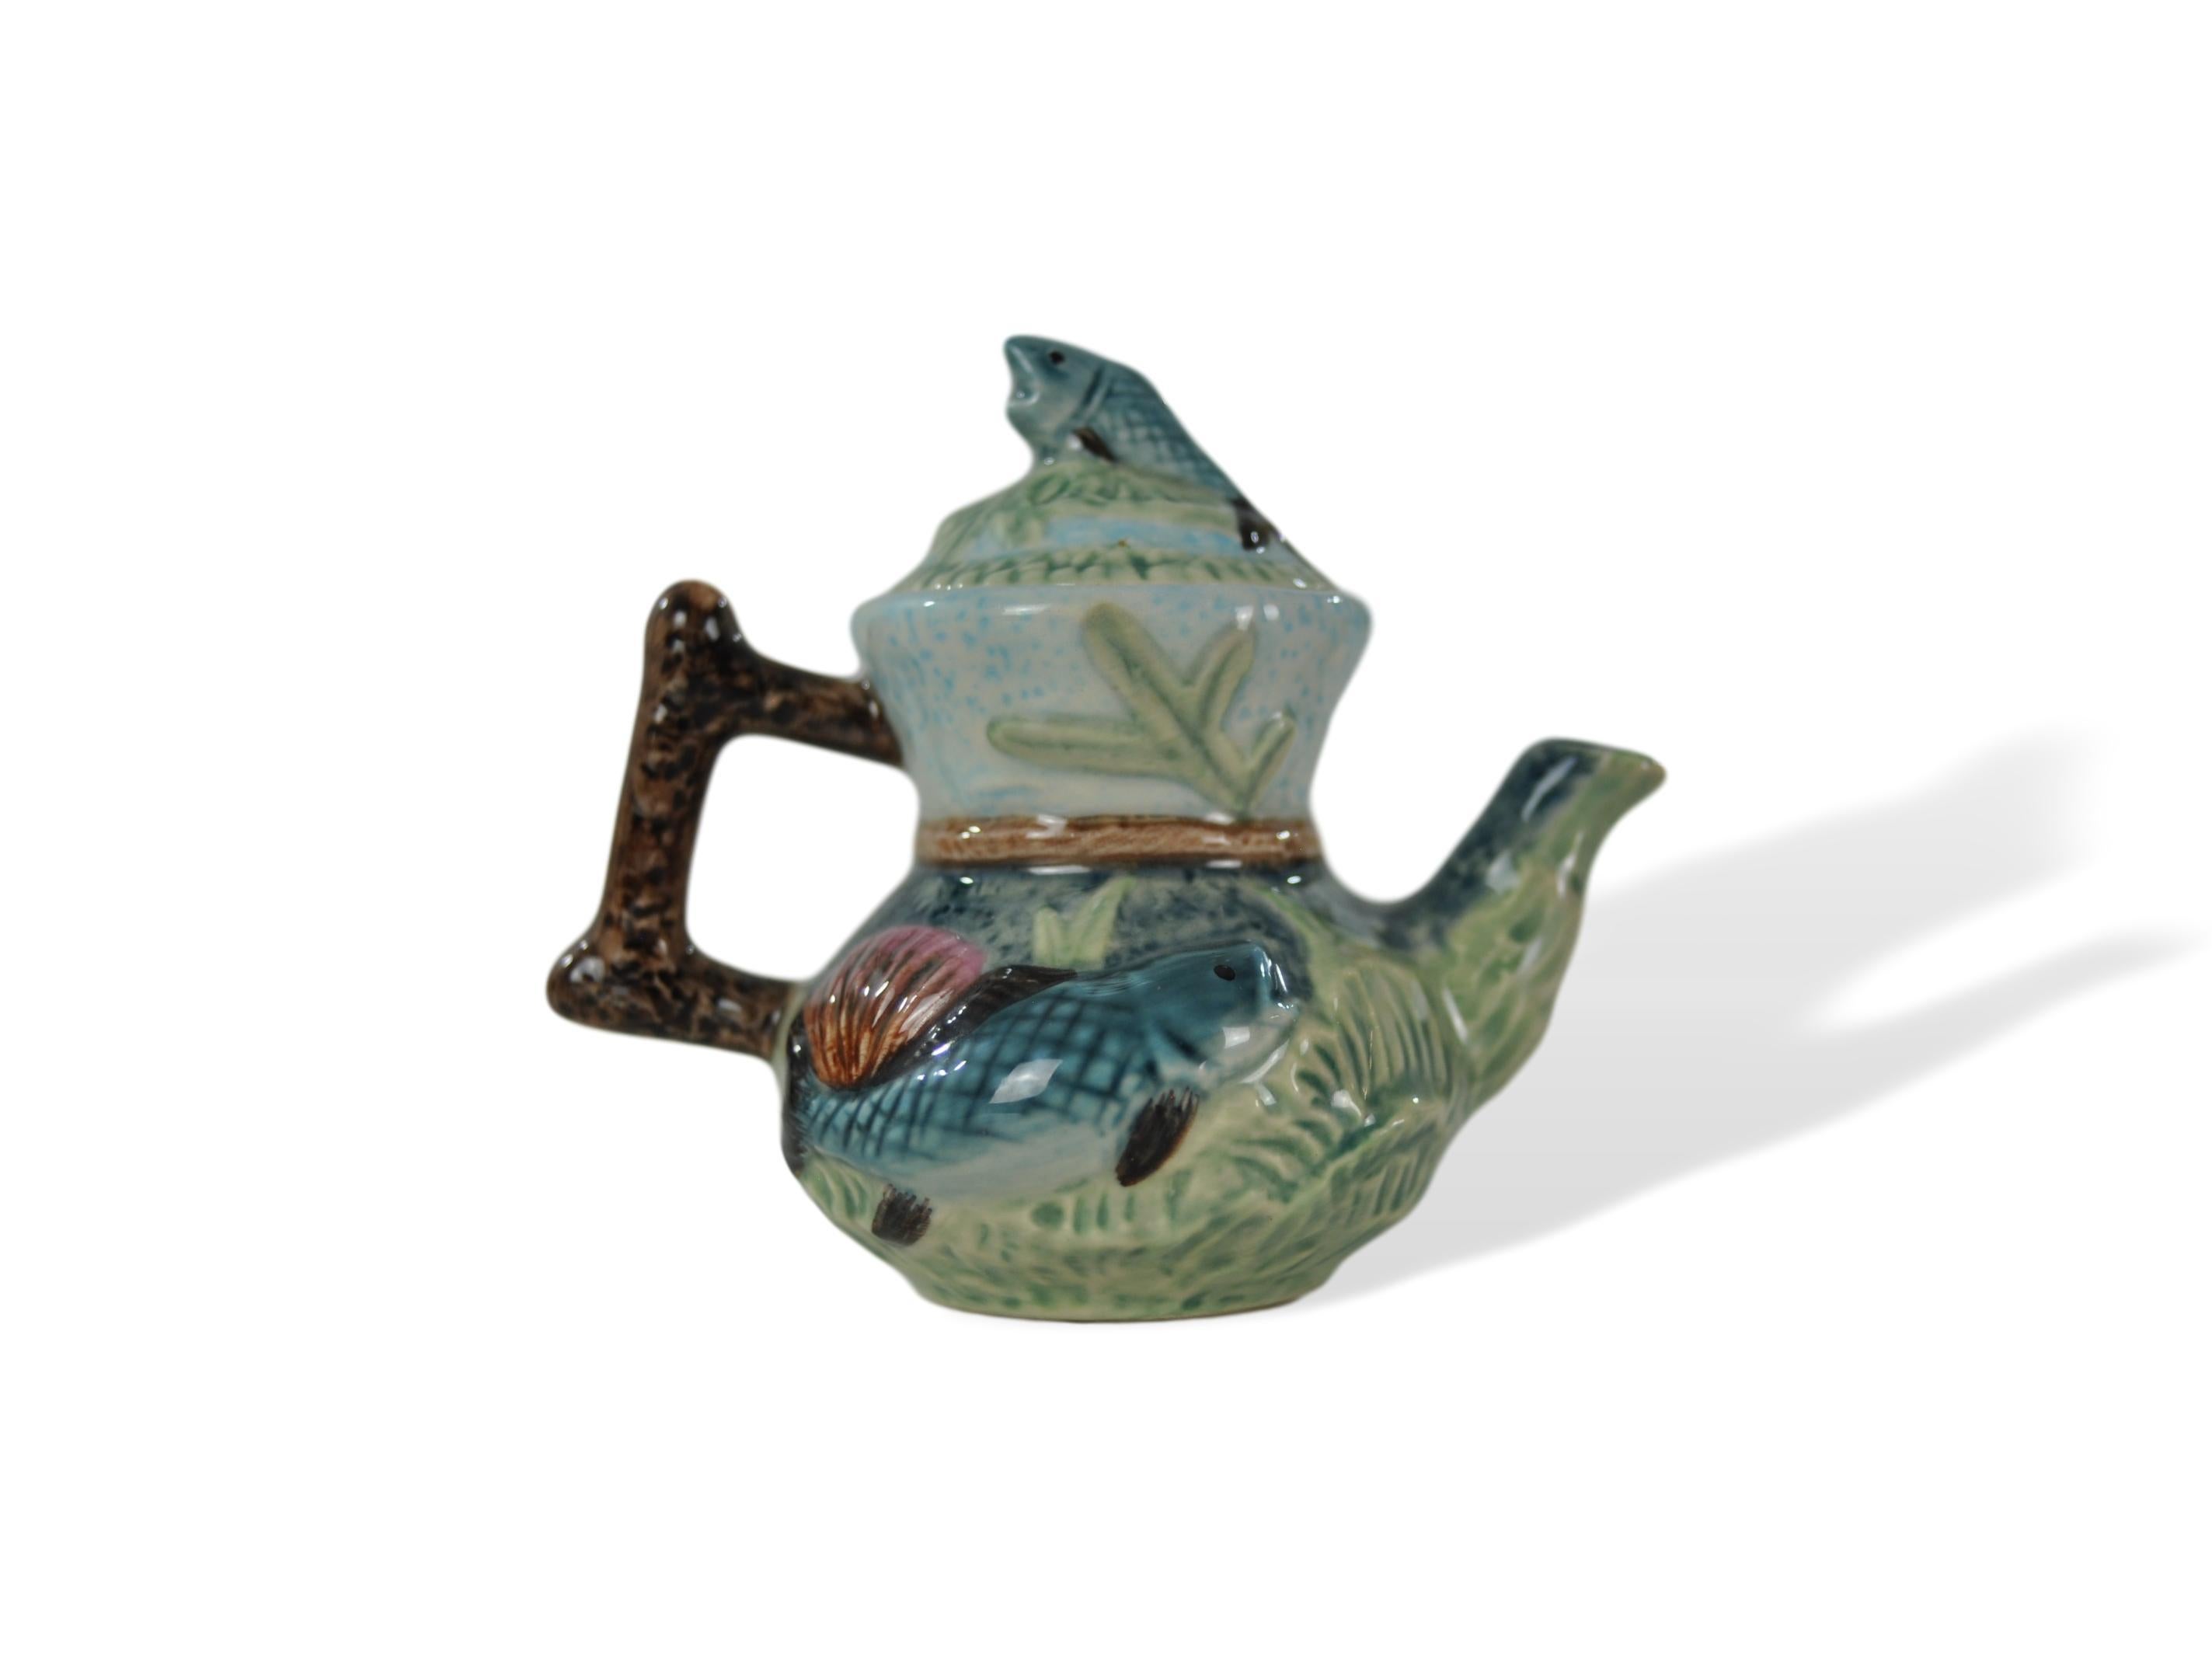 Miniature Majolica-glazed teapot, on a porcelain body, English, fish in waves pattern after shorter and sons, English, circa 1920. Mounted with a tiny sardine finial, this charming little piece is of extremely high quality; it is molded and glazed